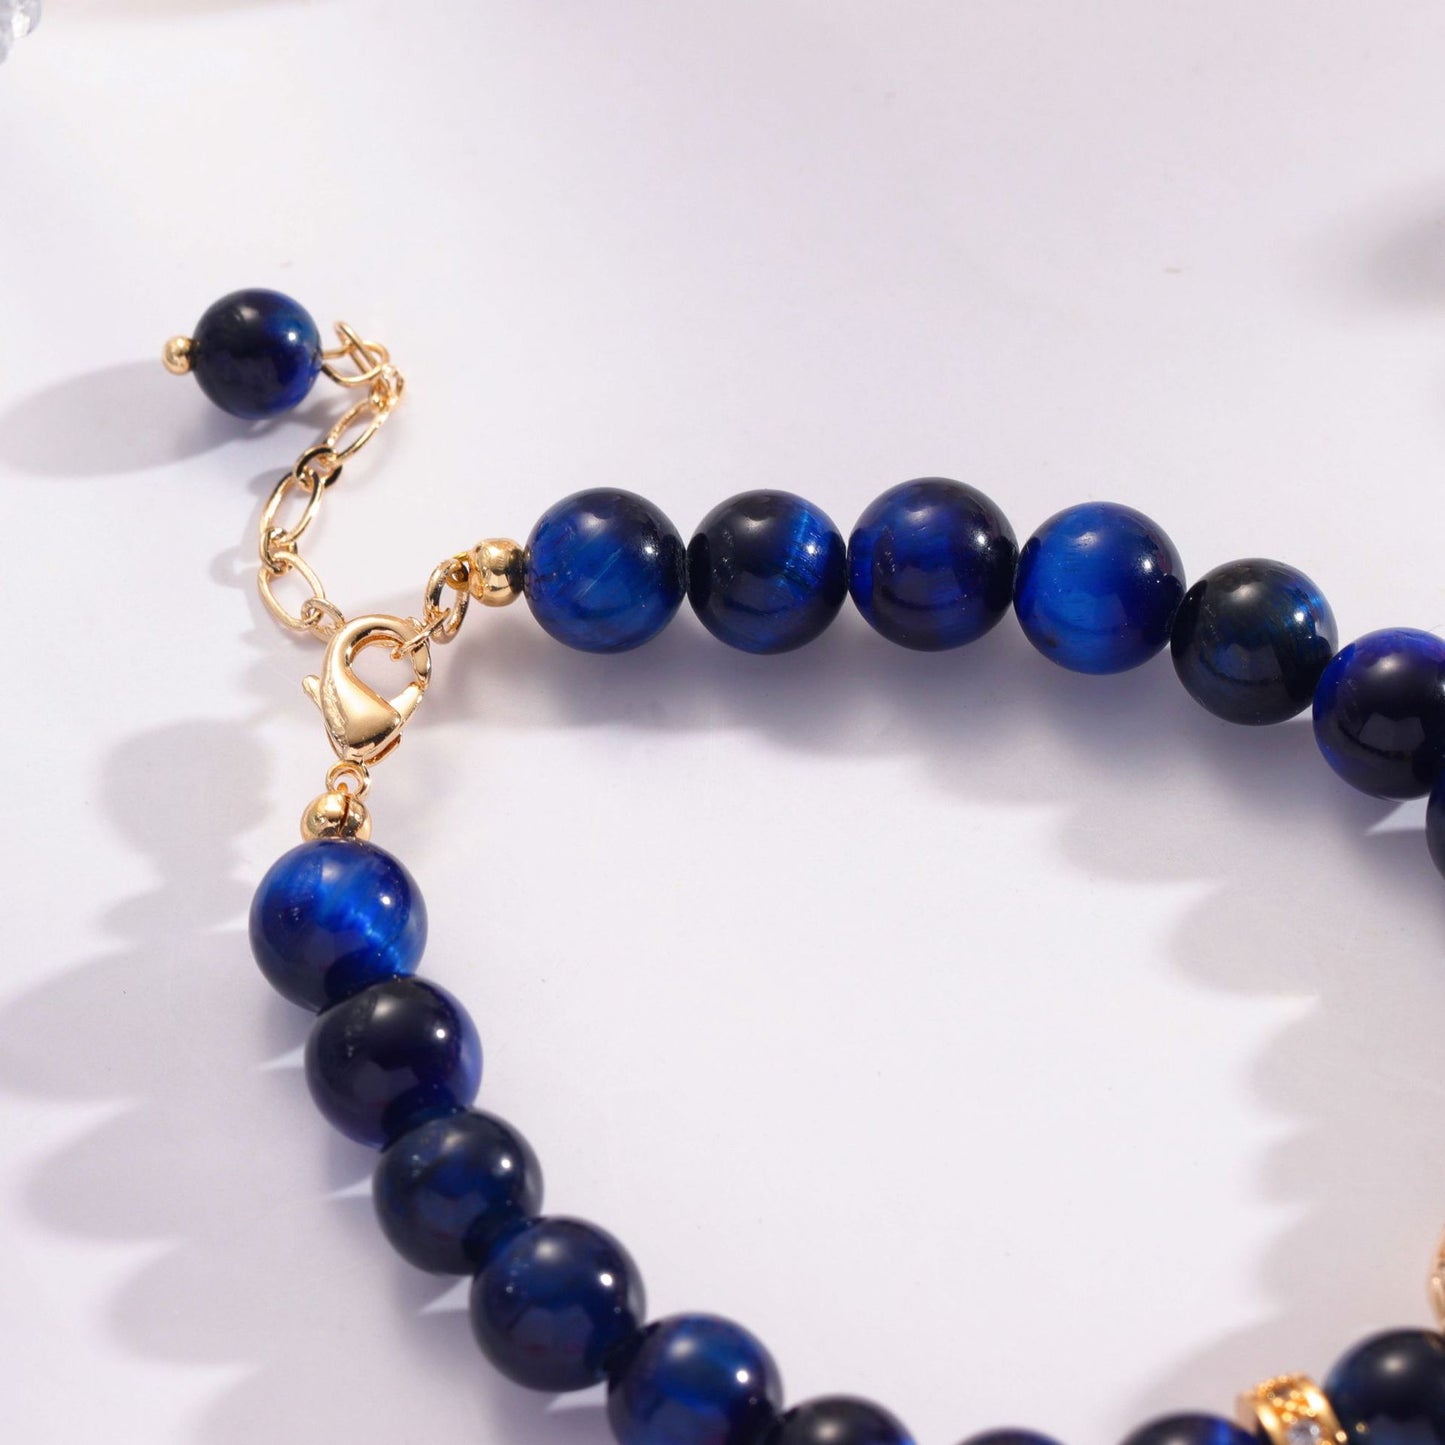 Blue Red Tiger Eye Stone Bracelet with Sterling Silver and Pearl Accents